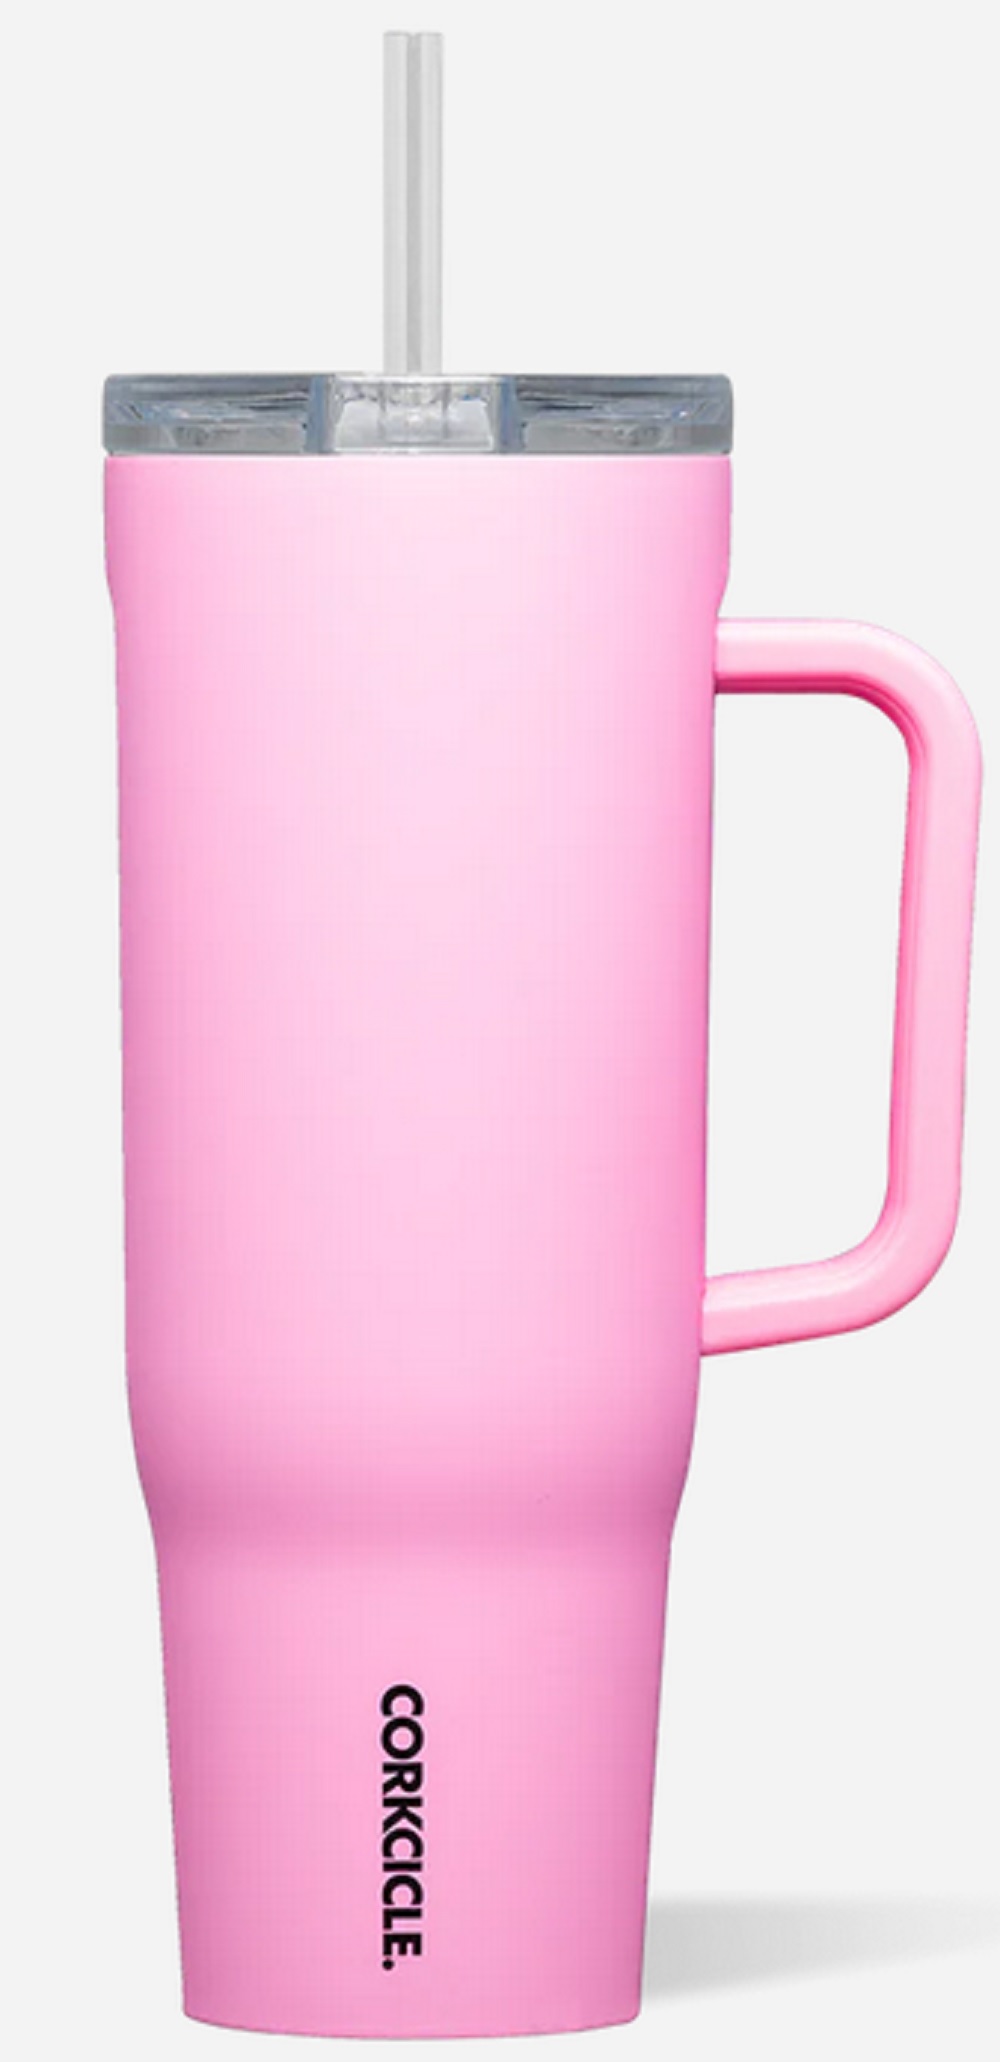 Corkcicle 40oz. Sun-Soaked Pink Cruiser Insulated Tumbler with Handle